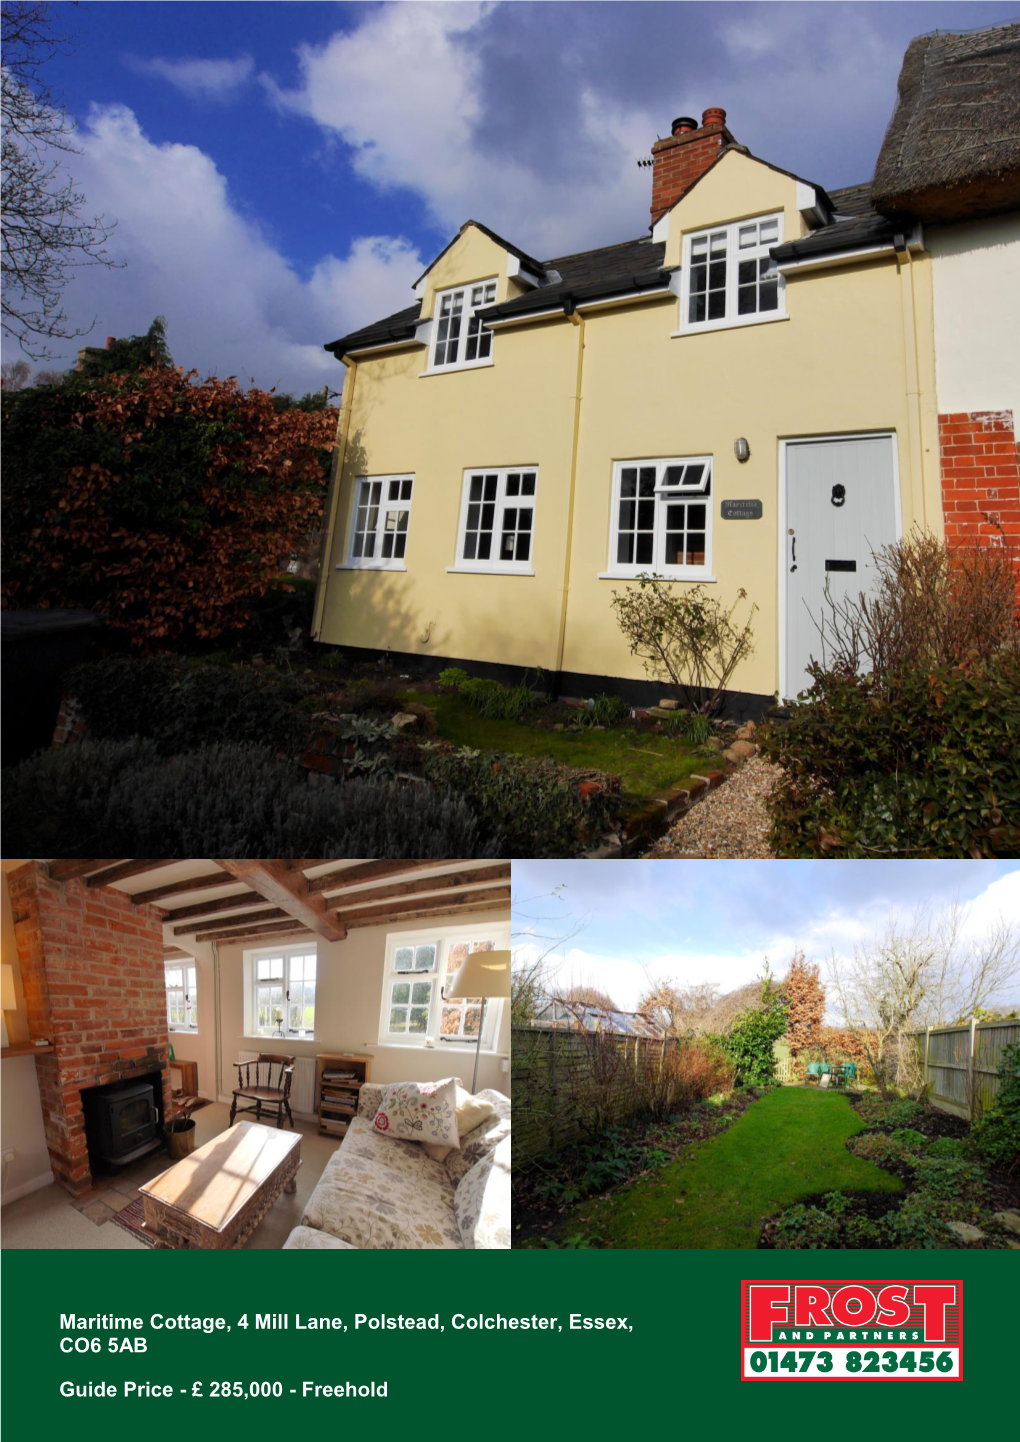 Maritime Cottage, 4 Mill Lane, Polstead, Colchester, Essex, CO6 5AB